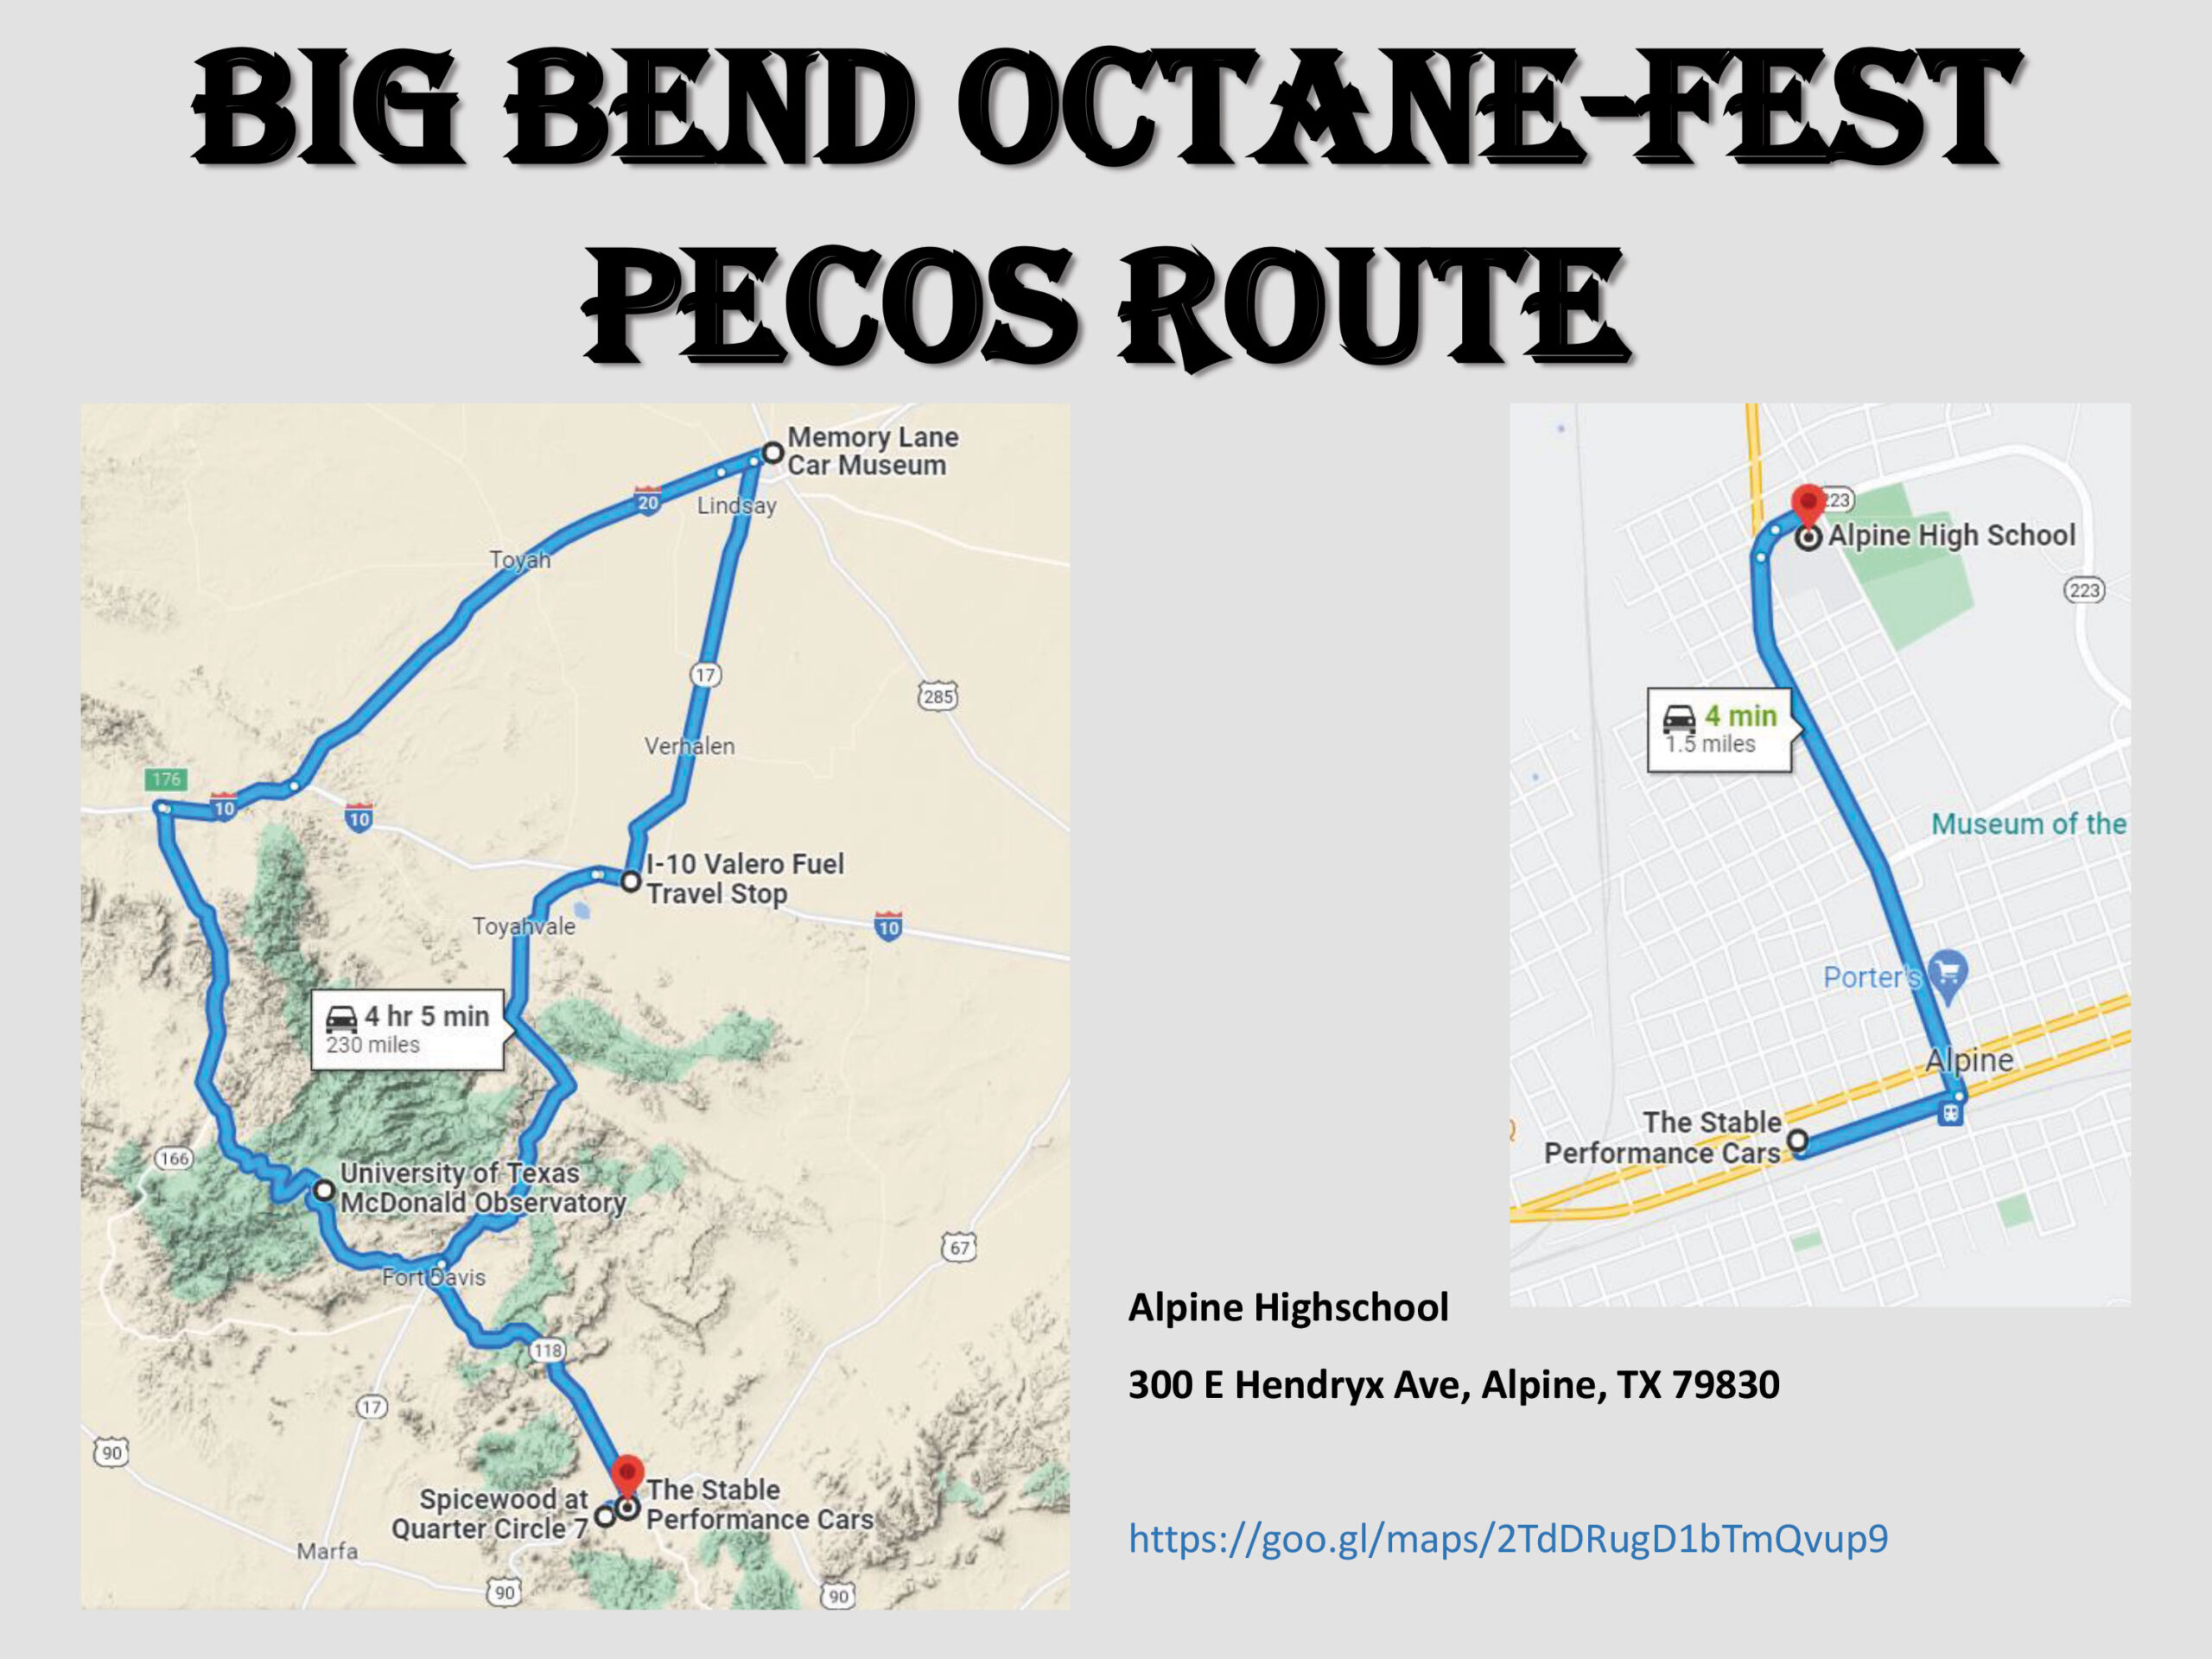 Map of the Big Bend Octane Fest Pecos Route.